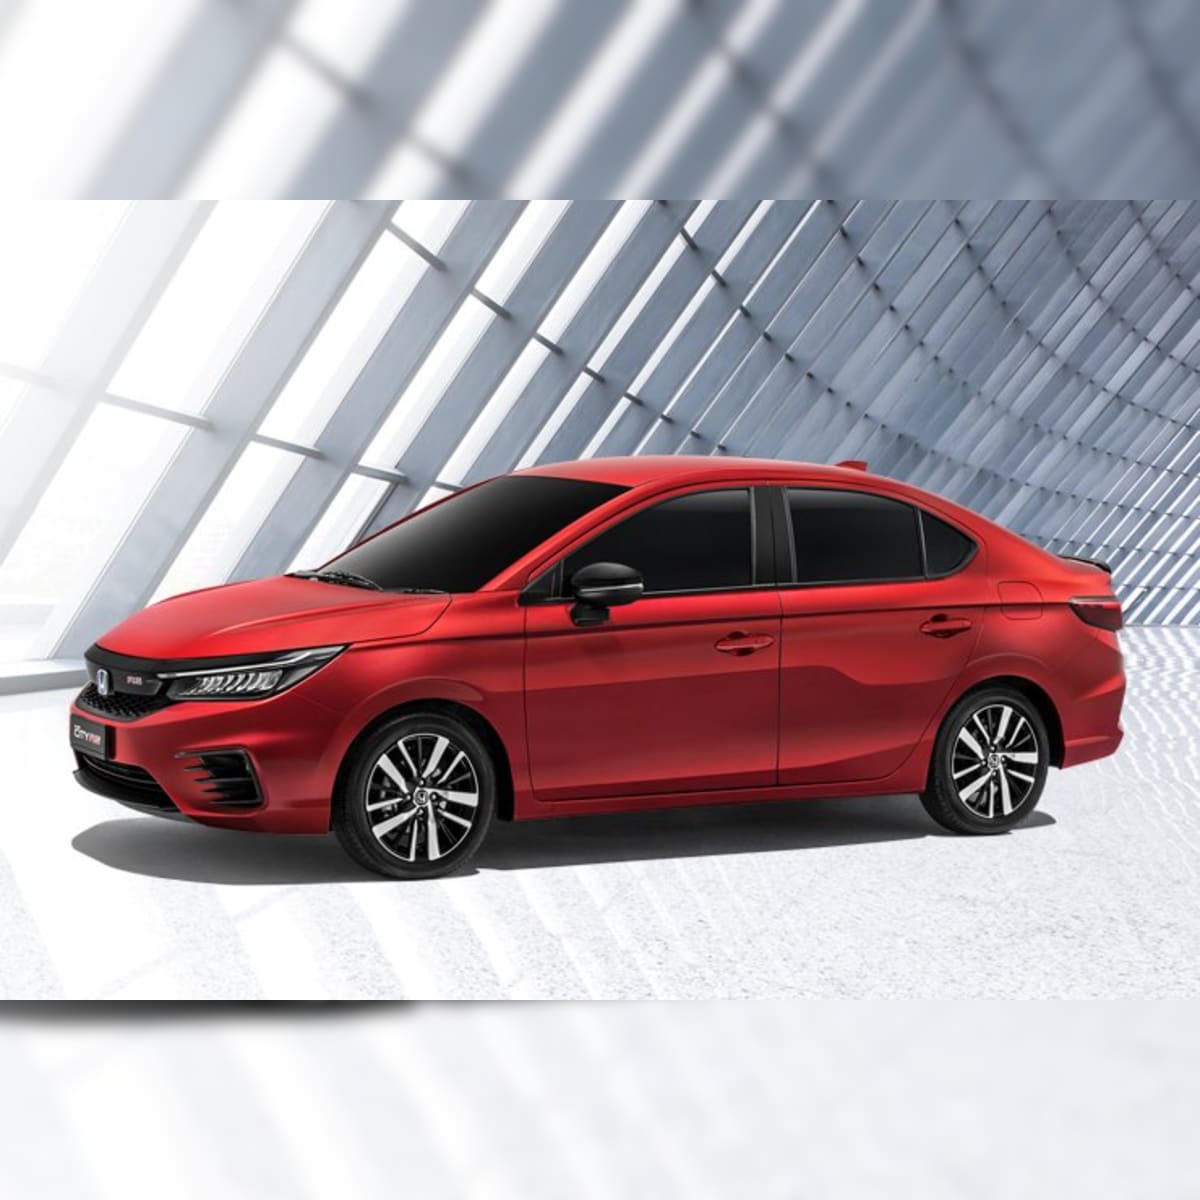 India Bound 2020 Honda City Hybrid Unveiled In Malaysia Expected To Arrive In India In 2021